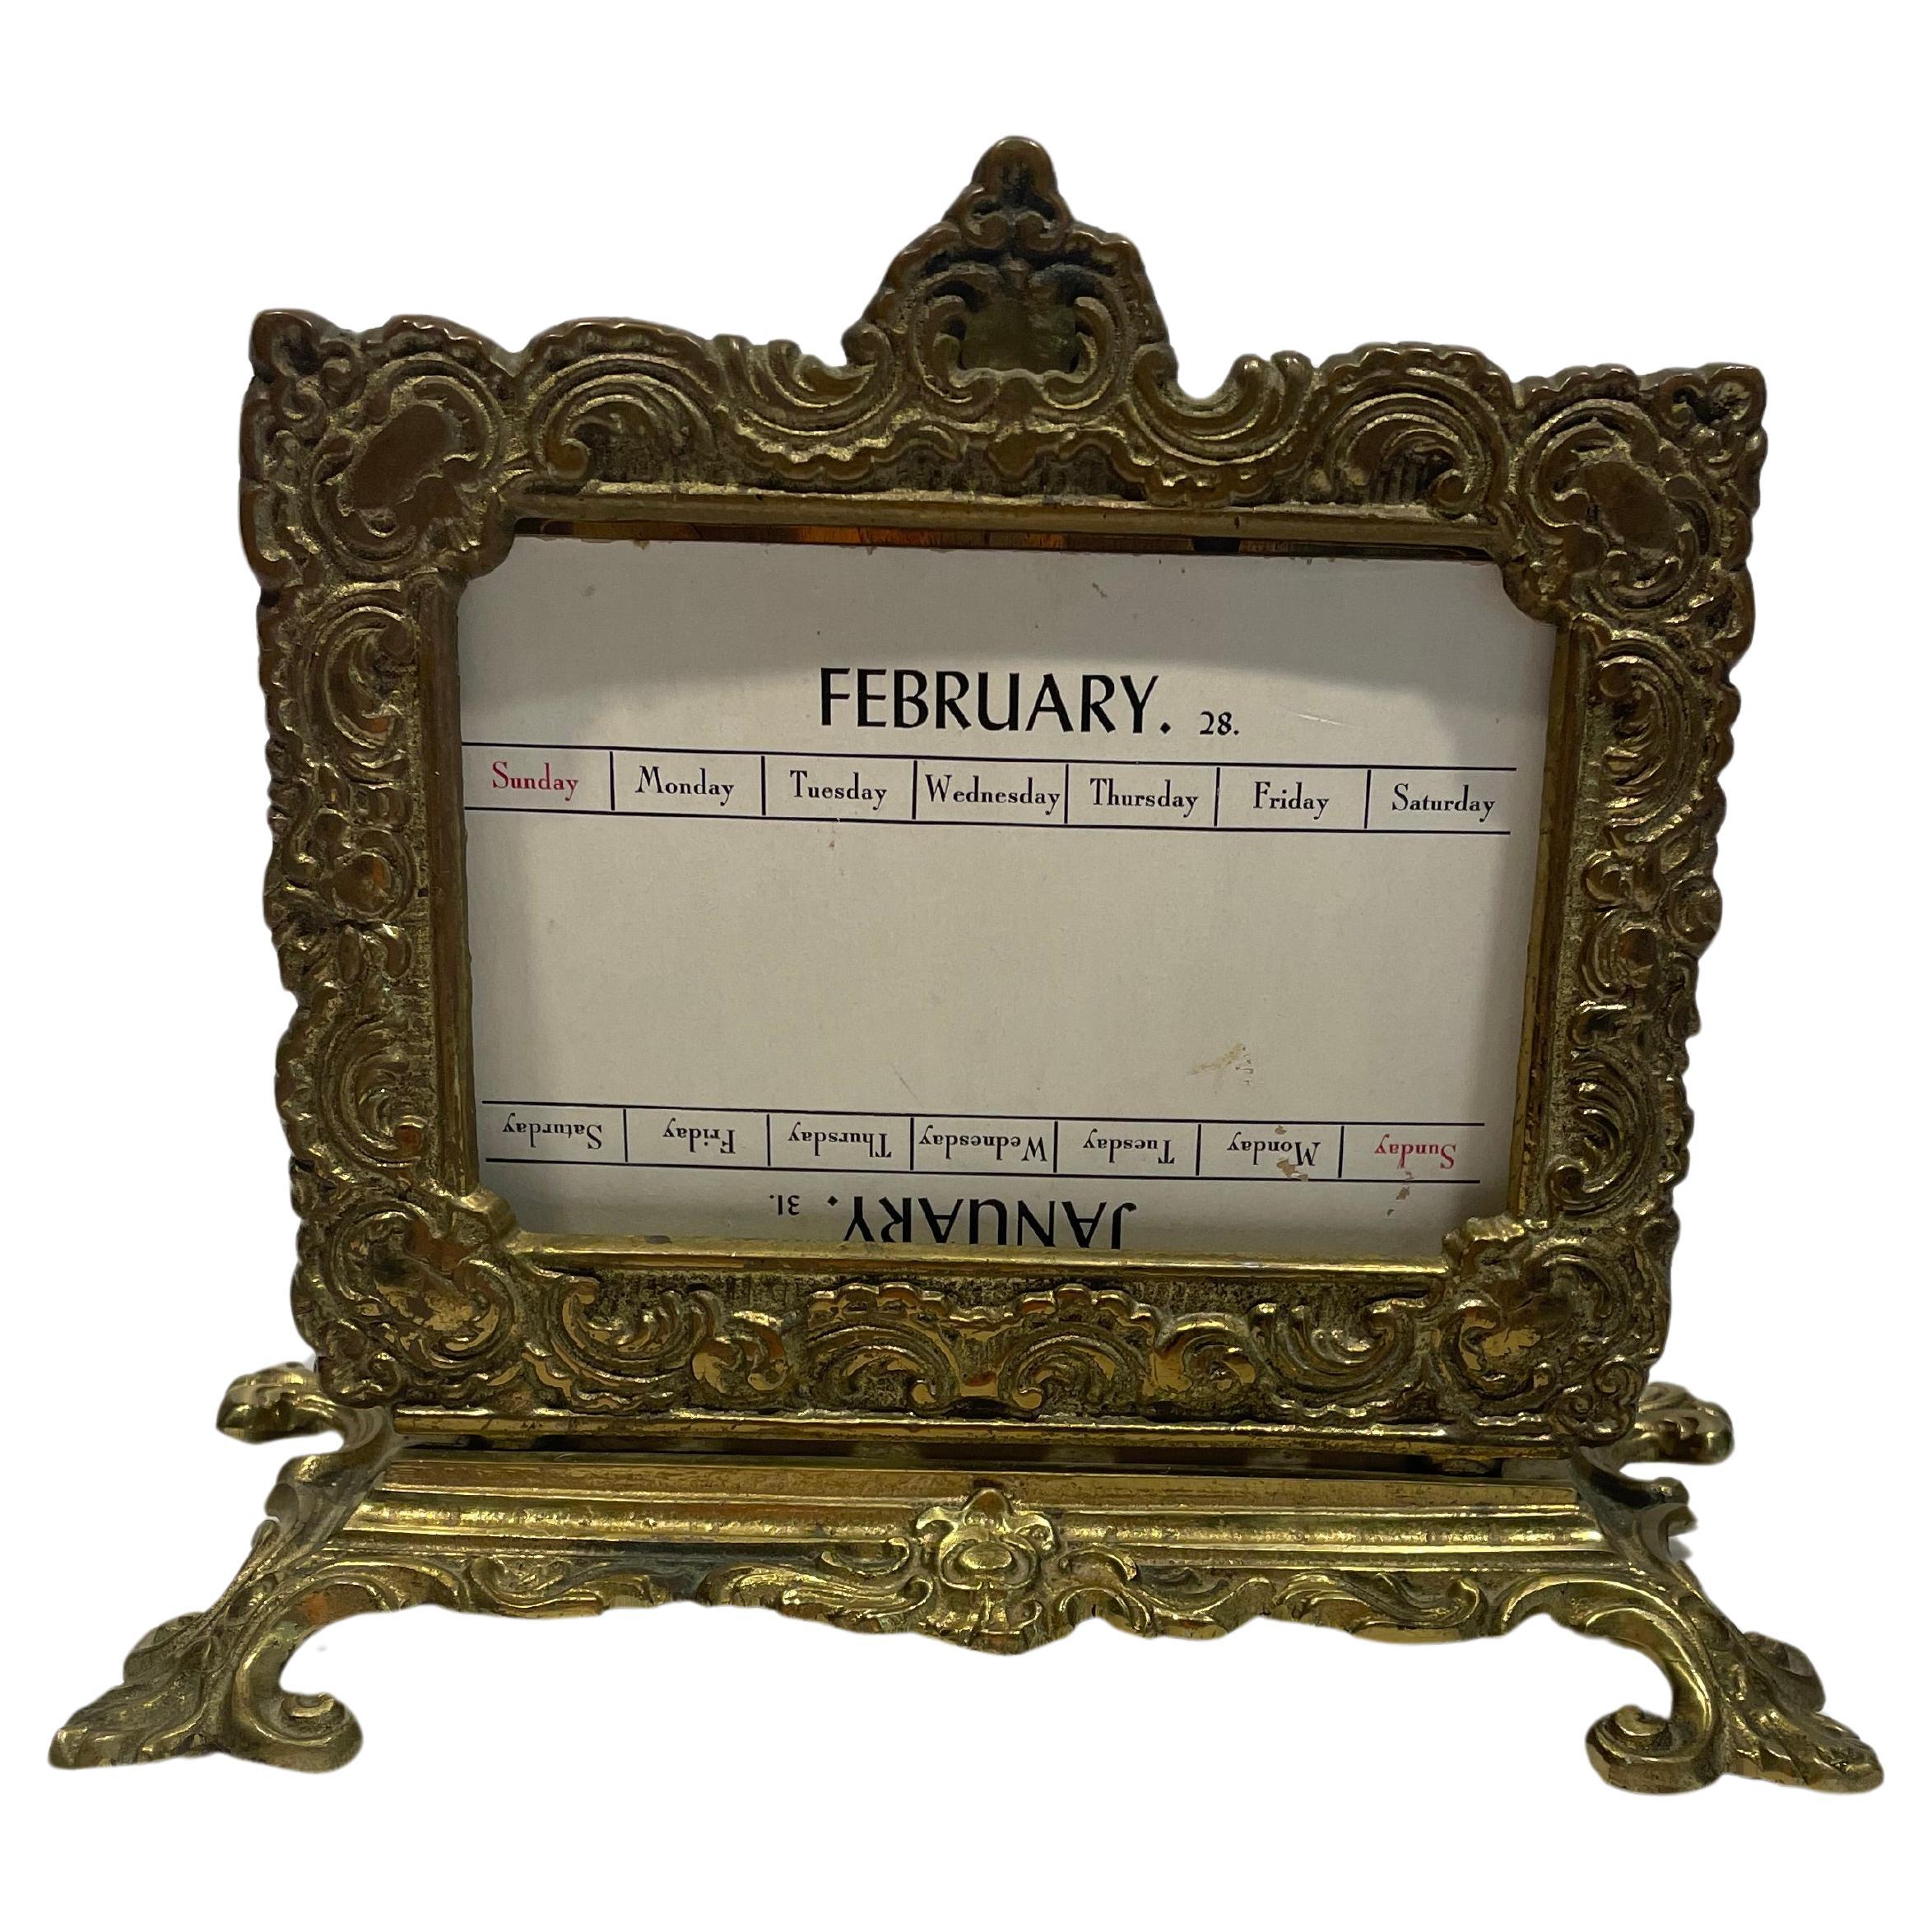 A handsome, stately desk calendar and letter holder from the Victorian era. It's hand-forged from solid brass,  which one can feel from the weight of the piece. The antique brass has a rich and lustrous patina, that reflects the light nicely to